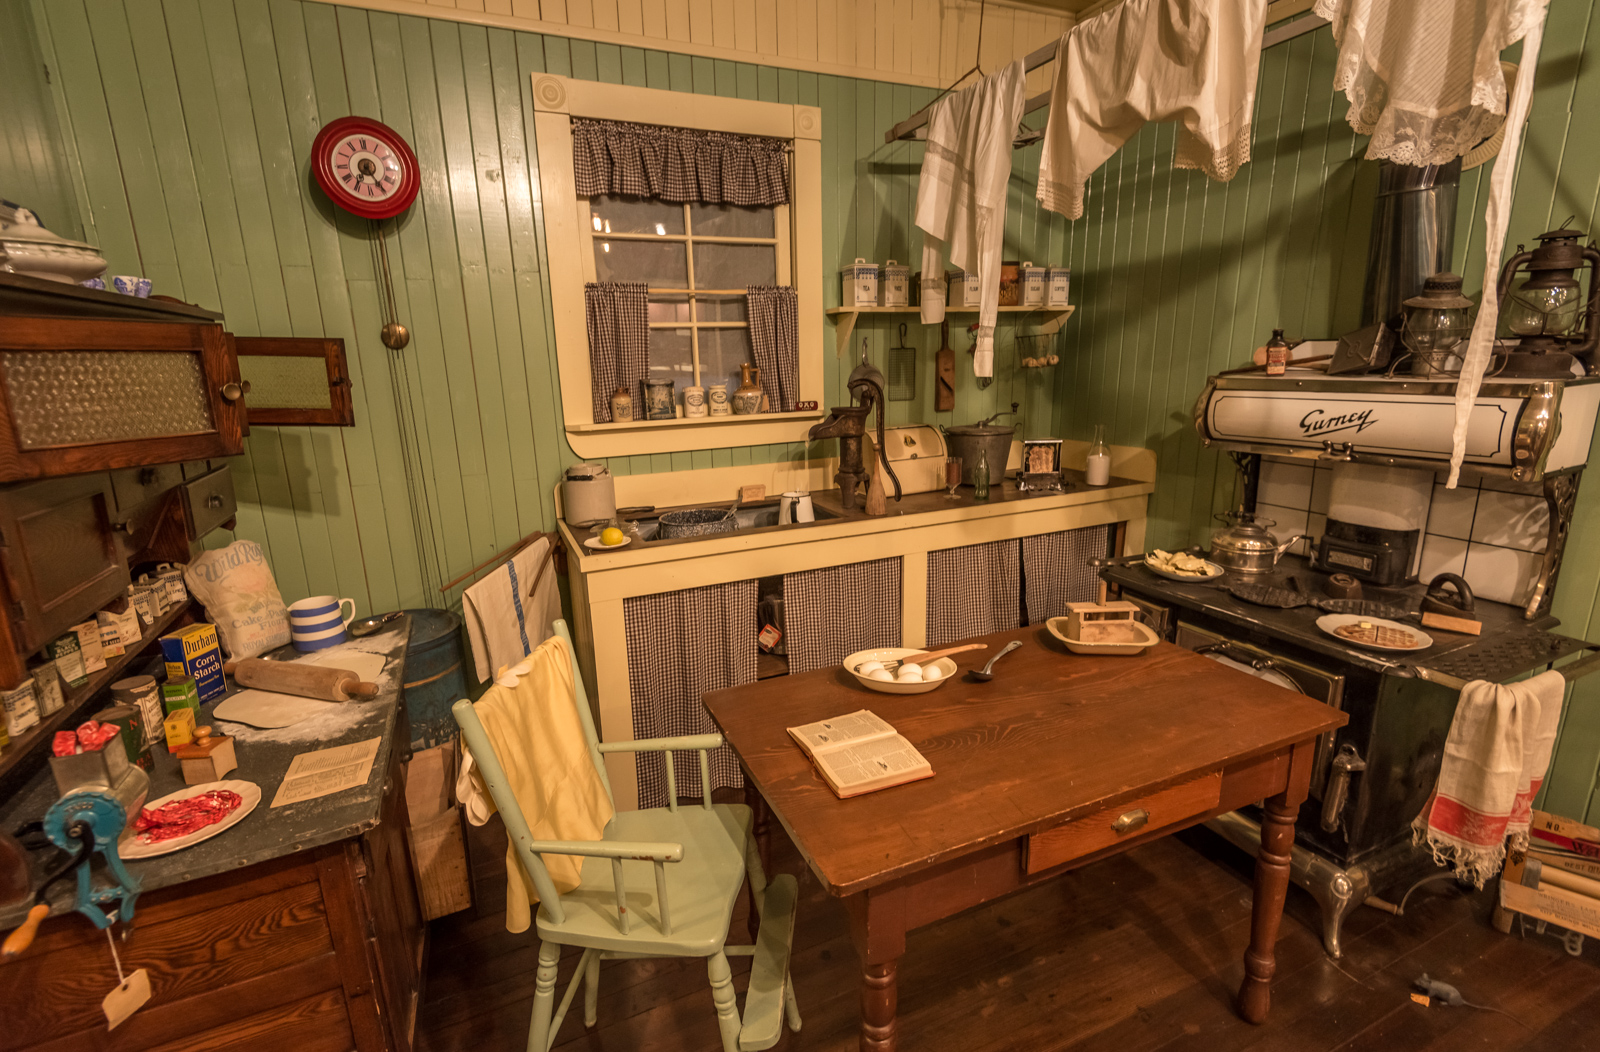 Recreation of domestic life during the industrial period of Mission’s past